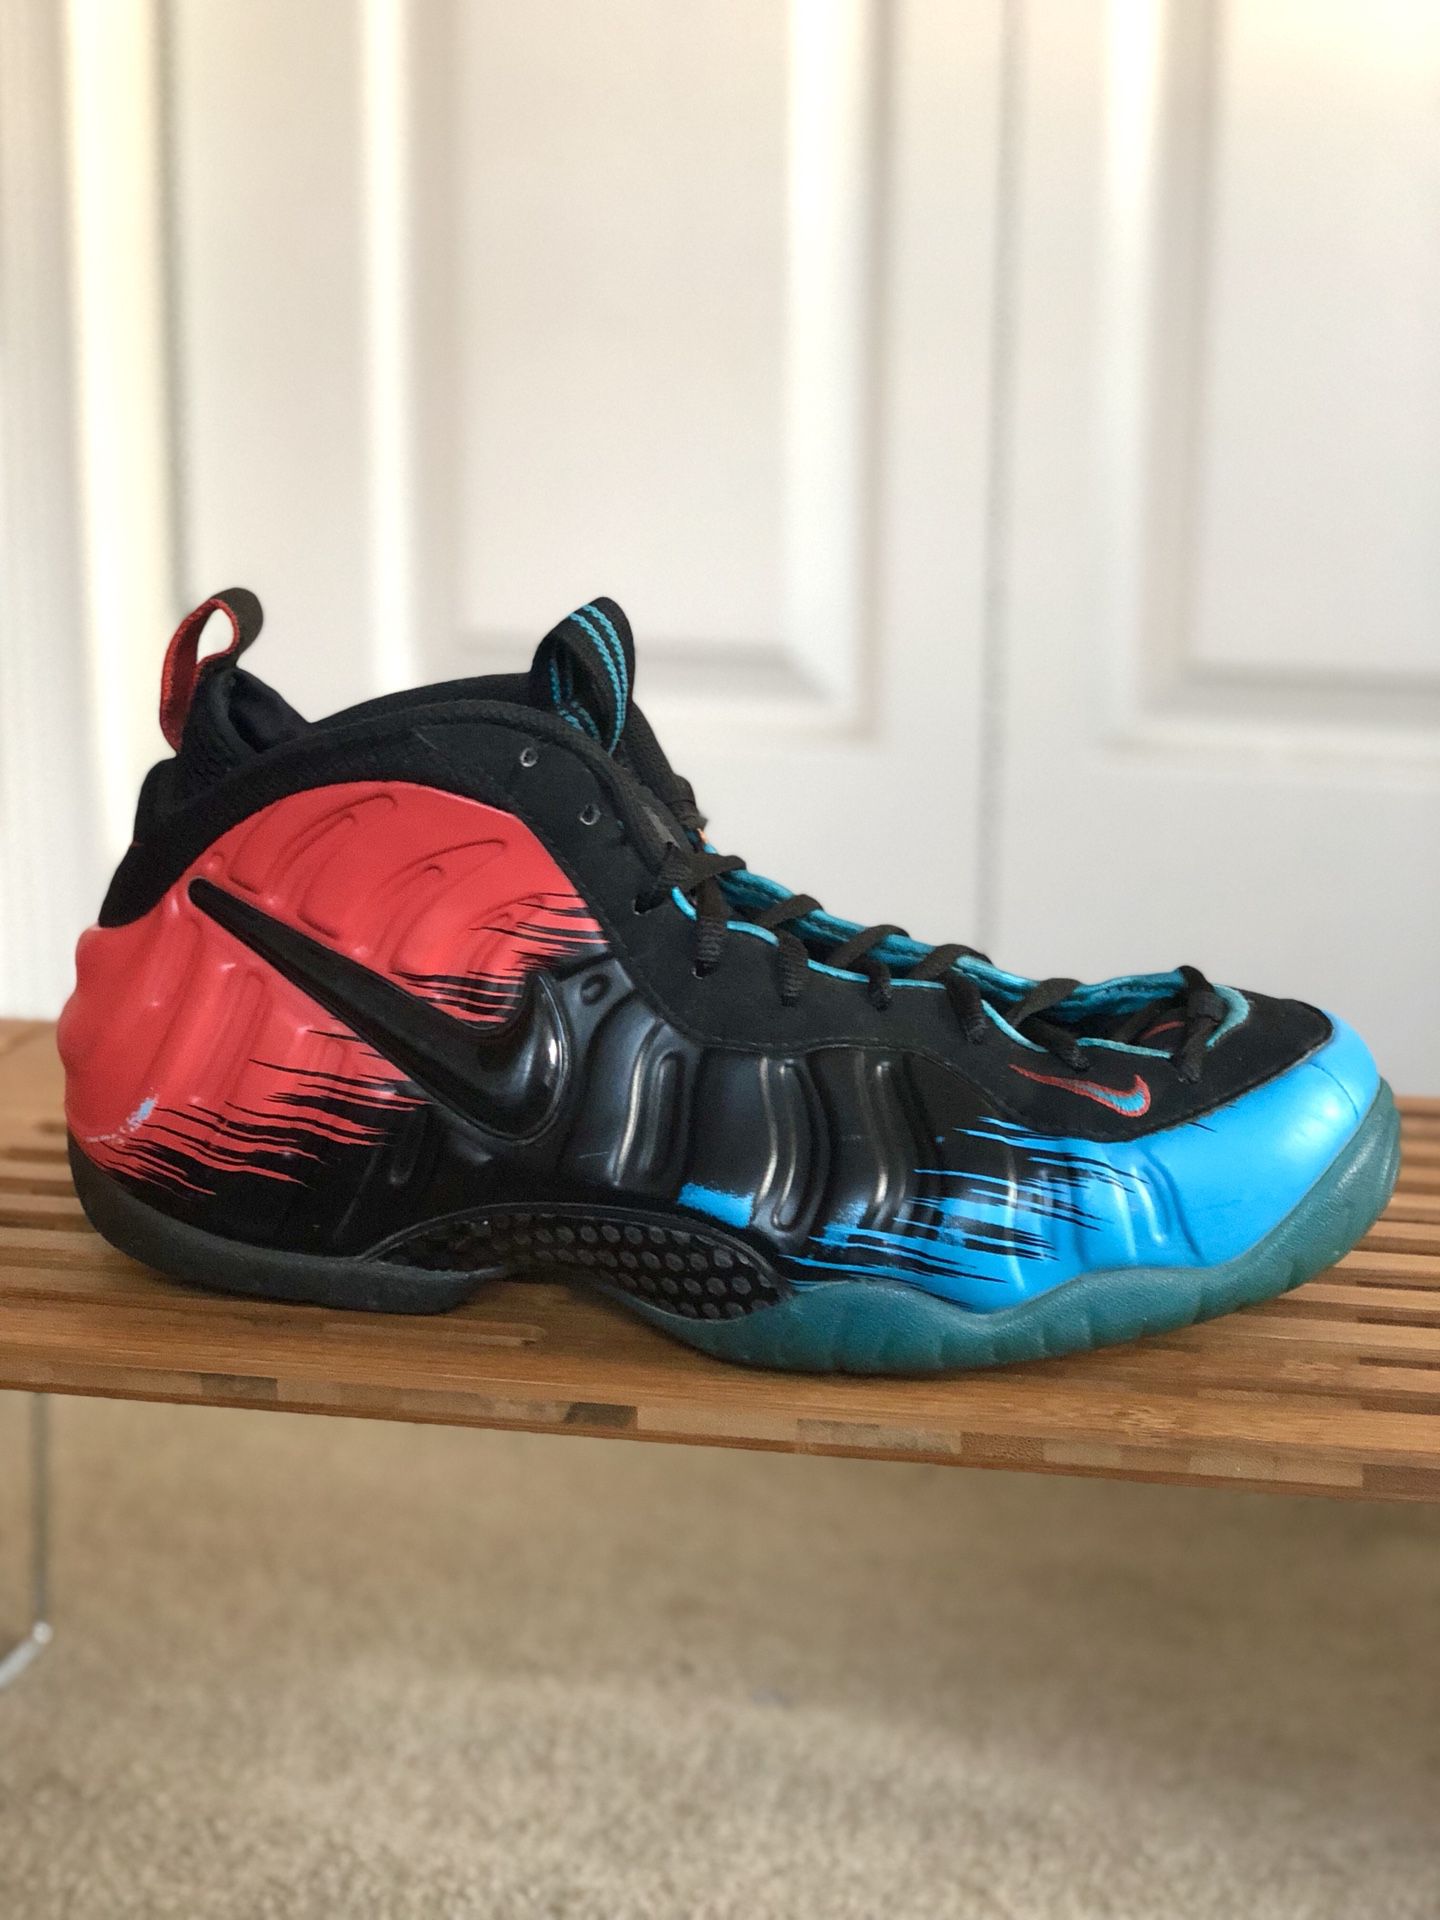 NIKE Air Foamposite Pro “SPIDERMAN” (2014) - Size 9.5 for Sale in